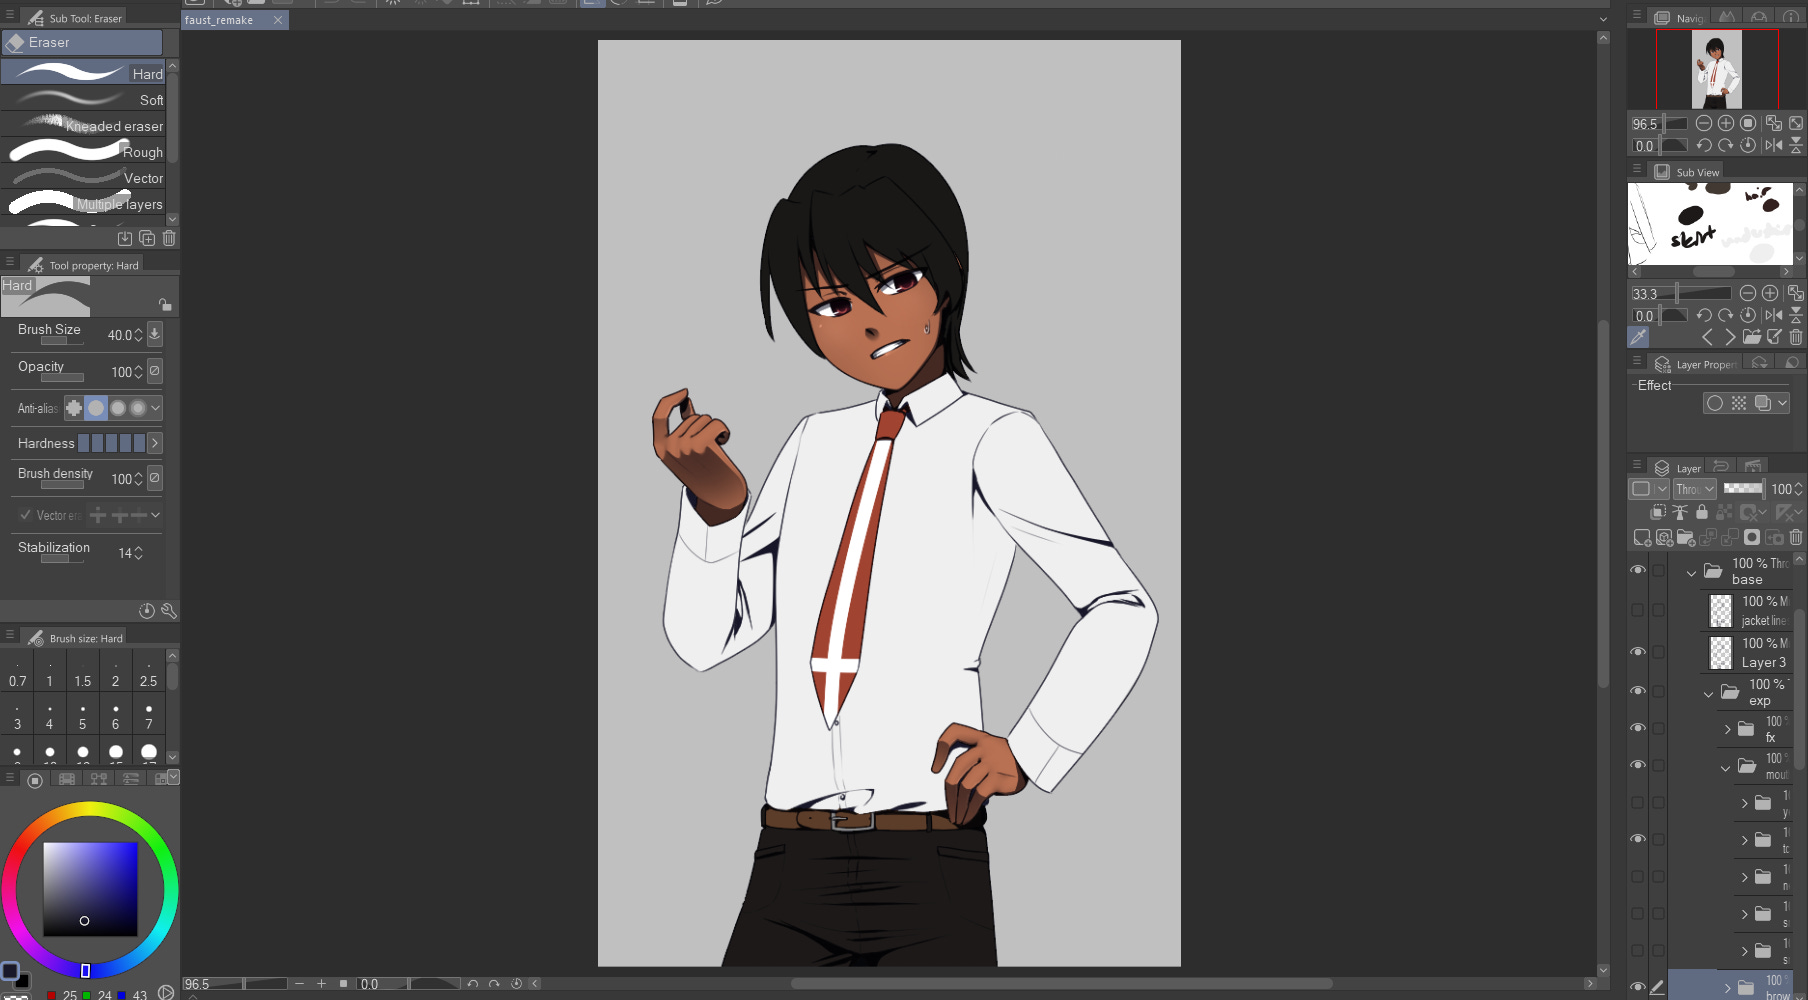 Work in progress of Faust's new sprite being rendered. His clothes and hair are still undone